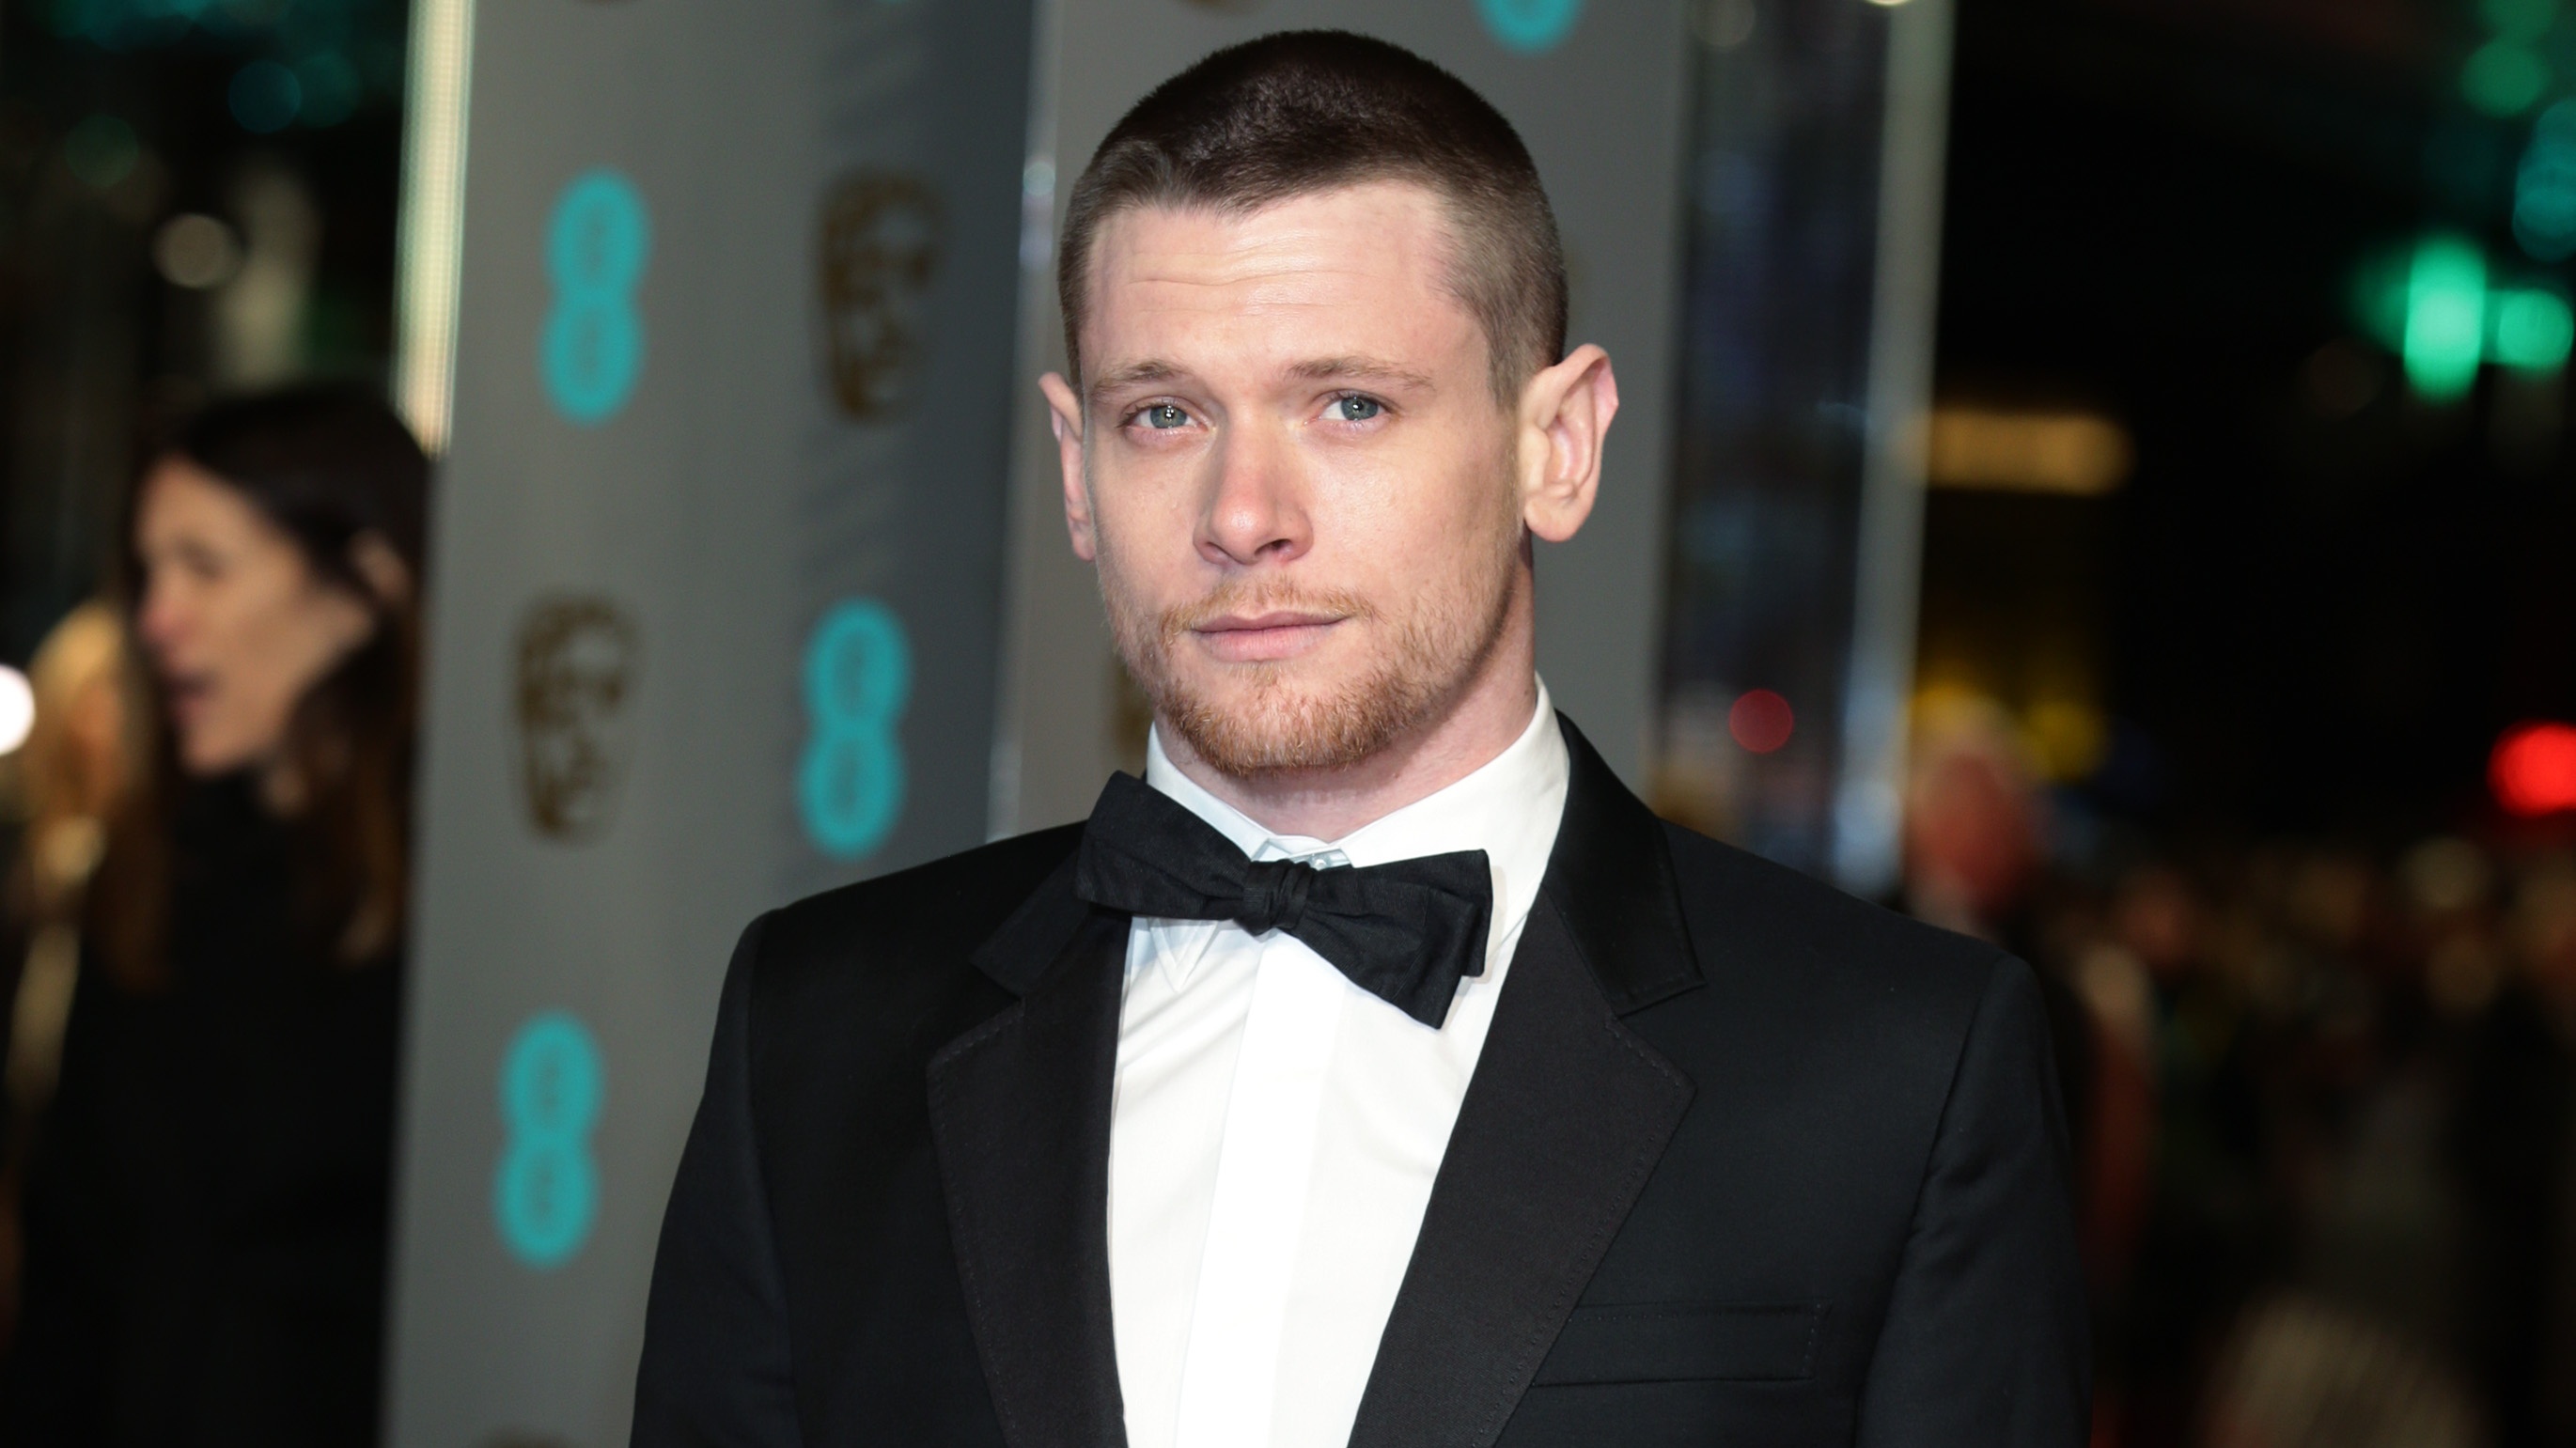 Jack O'Connell attending the EE British Academy Film Awards at the Royal Opera House, Bow Street, London. 